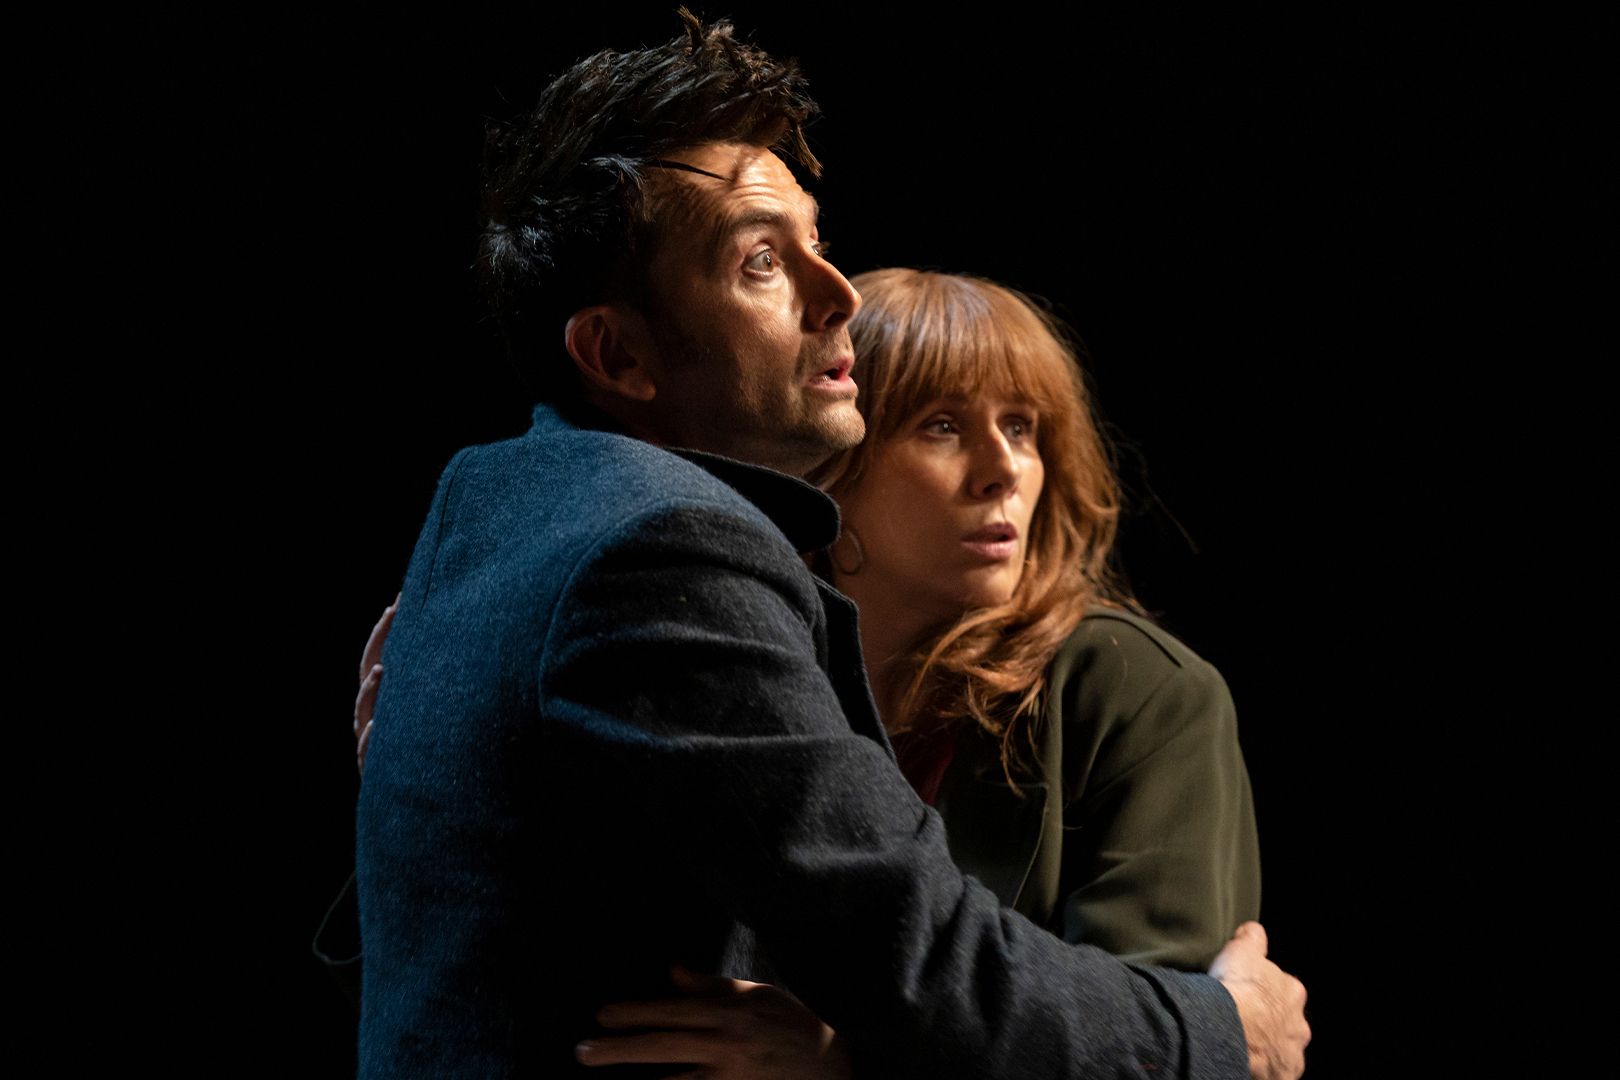 David Tennant as the Doctor and Catherine Tate as Donna Noble hugging in Doctor Who